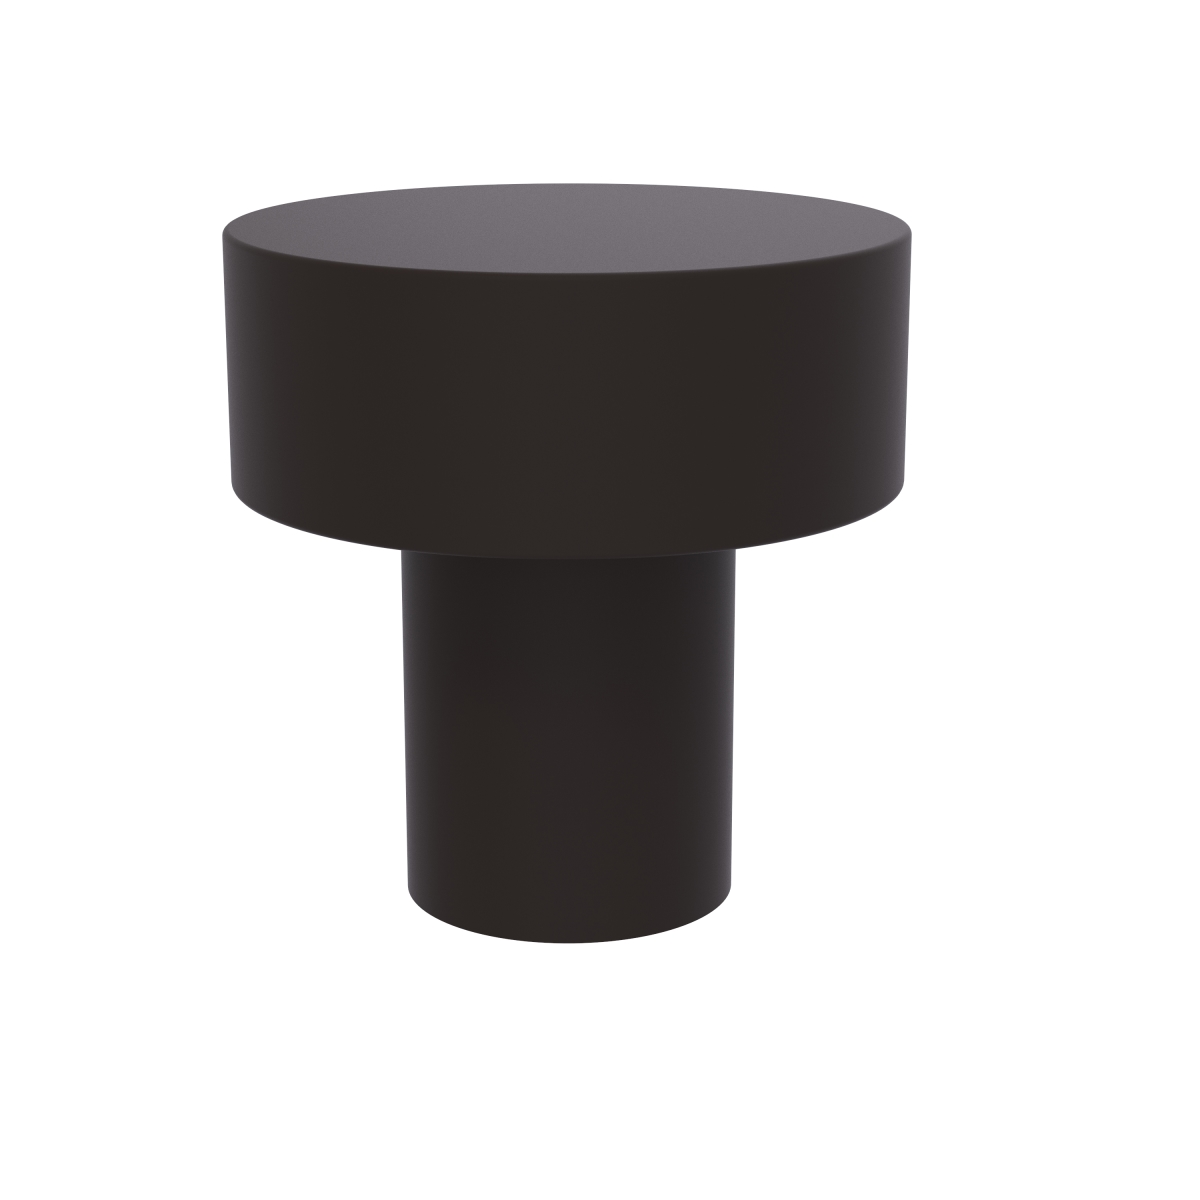 107-orb 1 In. Round Flat Top Cabinet Knob, Oil Rubbed Bronze